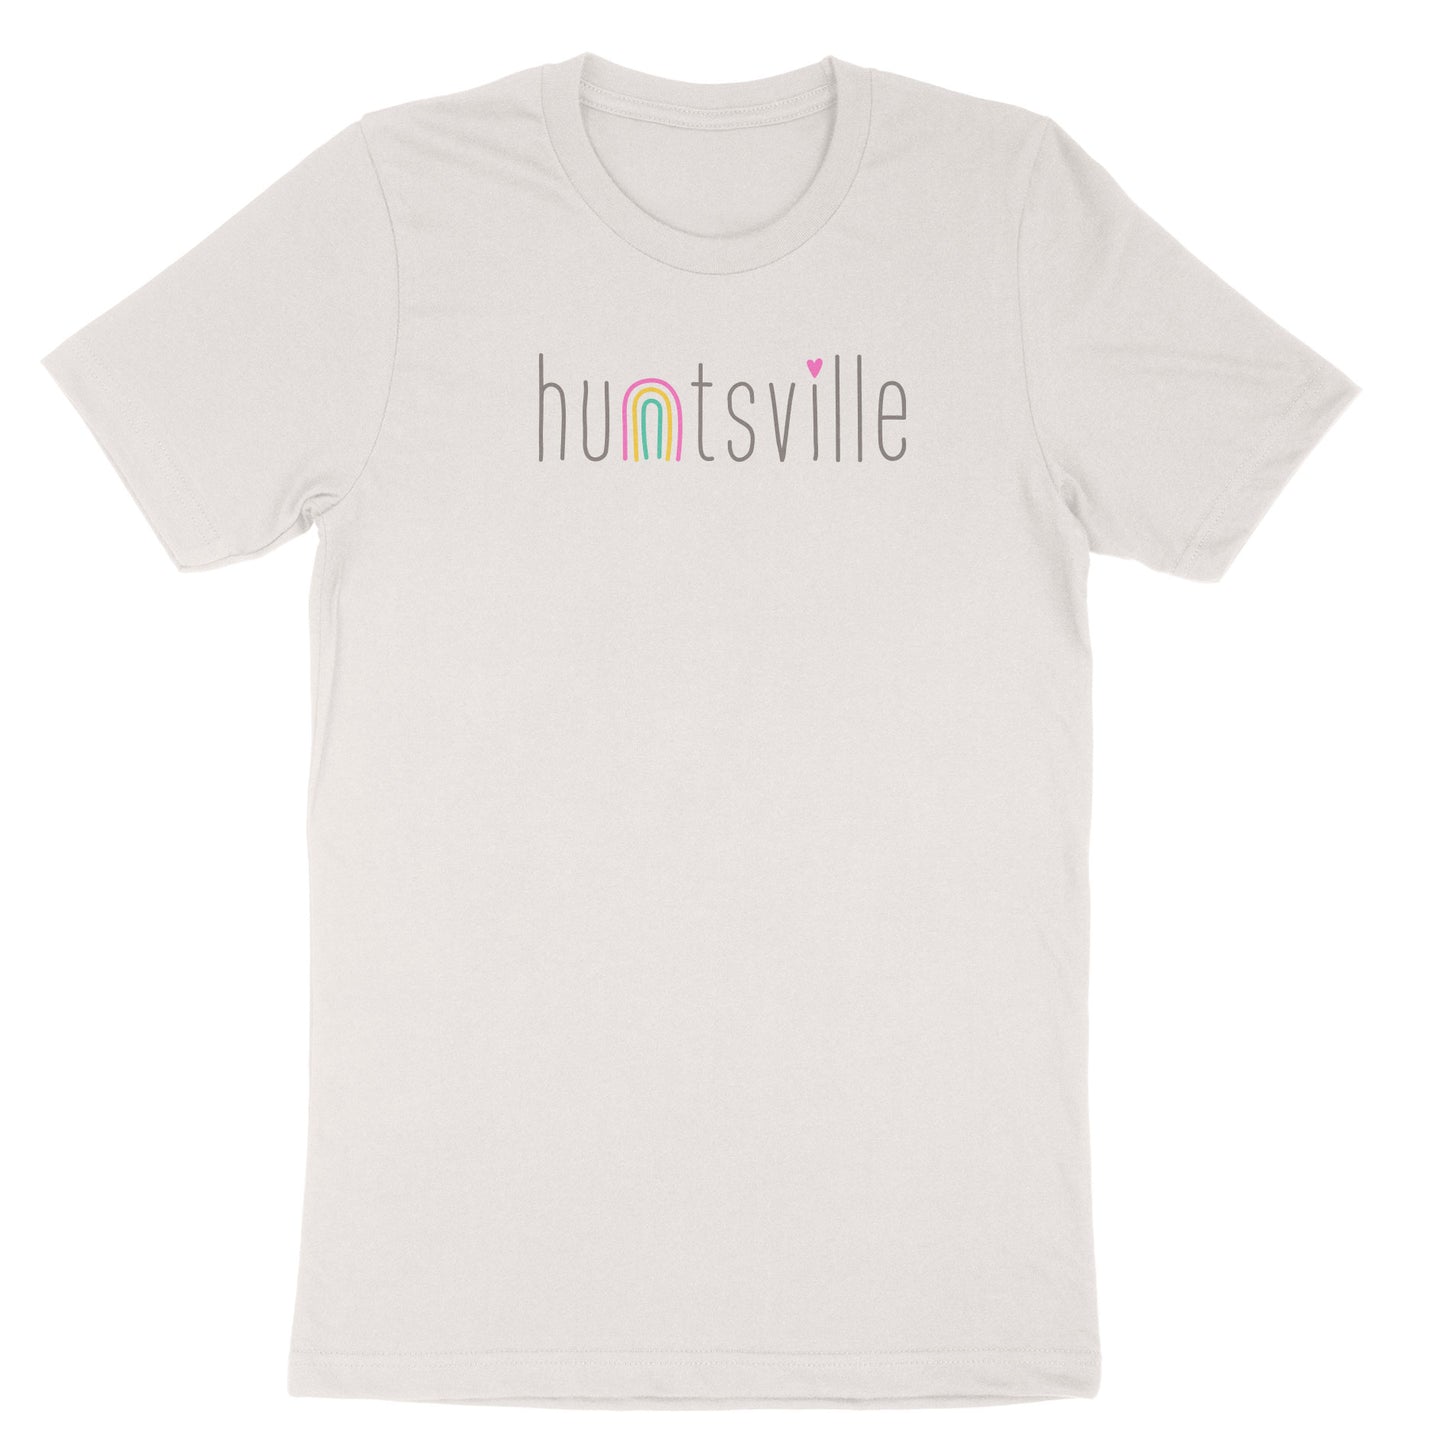 the text "huntsville" with a rainbow as the n design on a white t-shirt